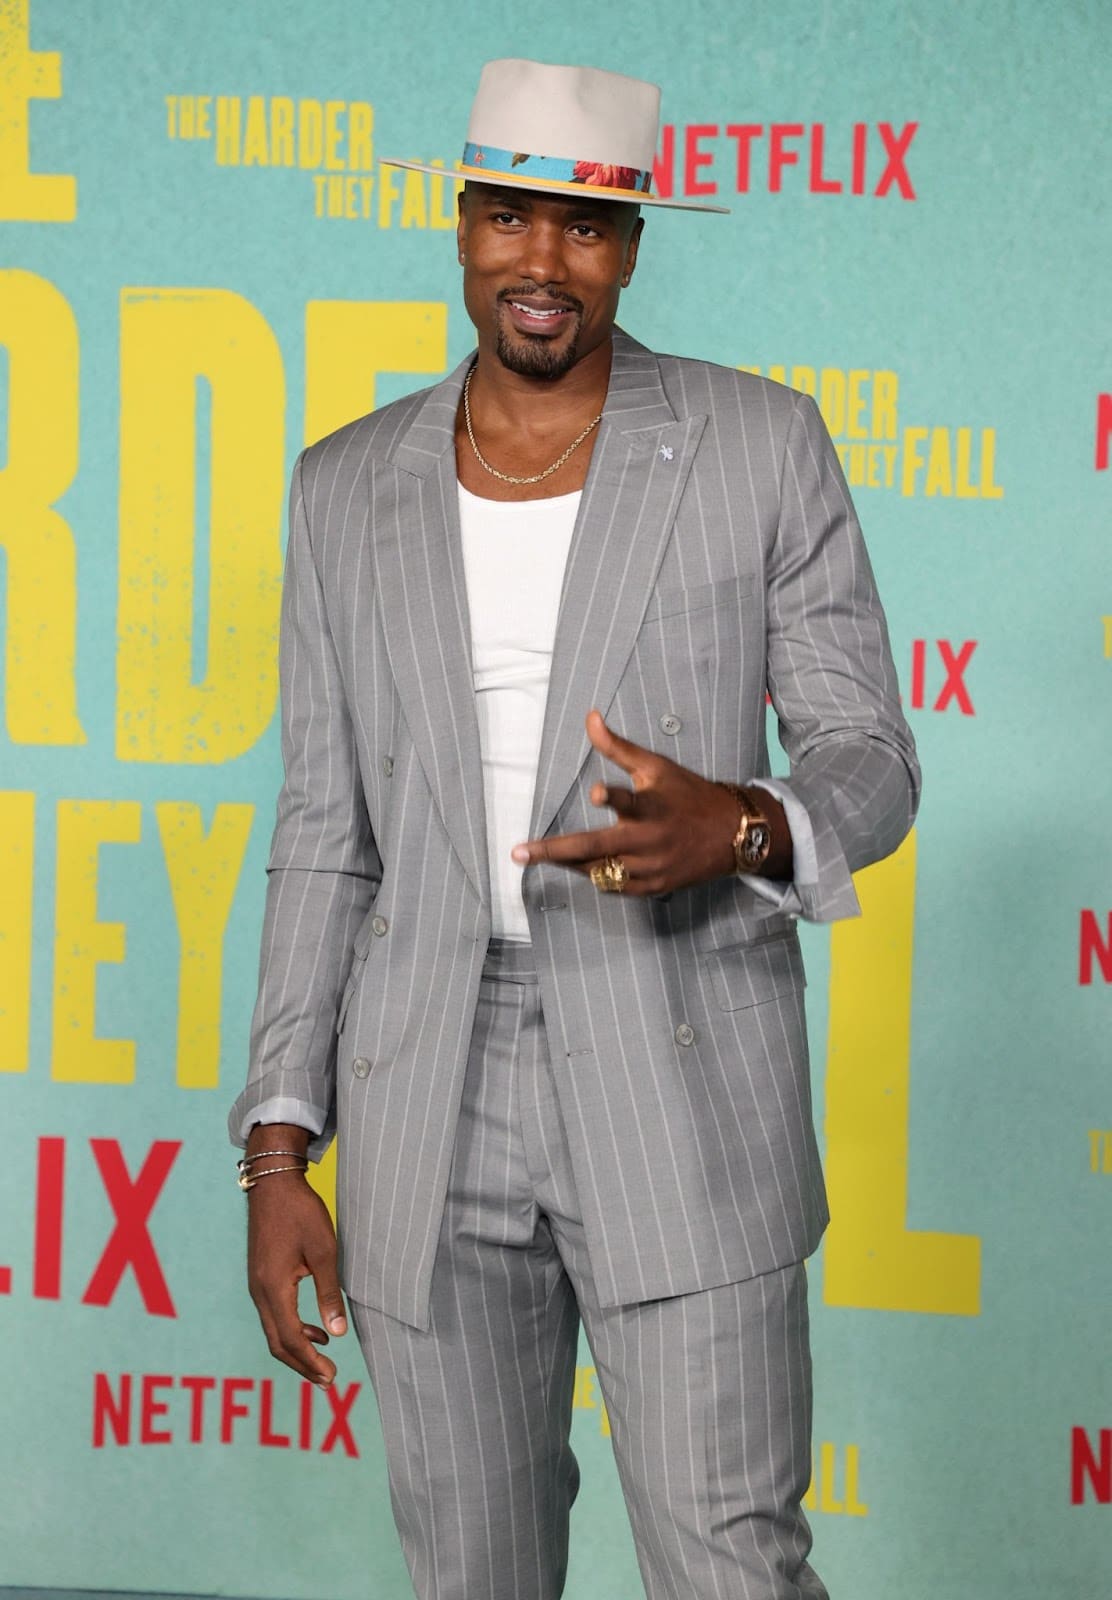 Serge Ibaka wore a white wide brim hat with a floral hat band and grey pinstripe suit at the premiere of The Harder They Fall in Los Angeles (Rich Fury/Getty Images).